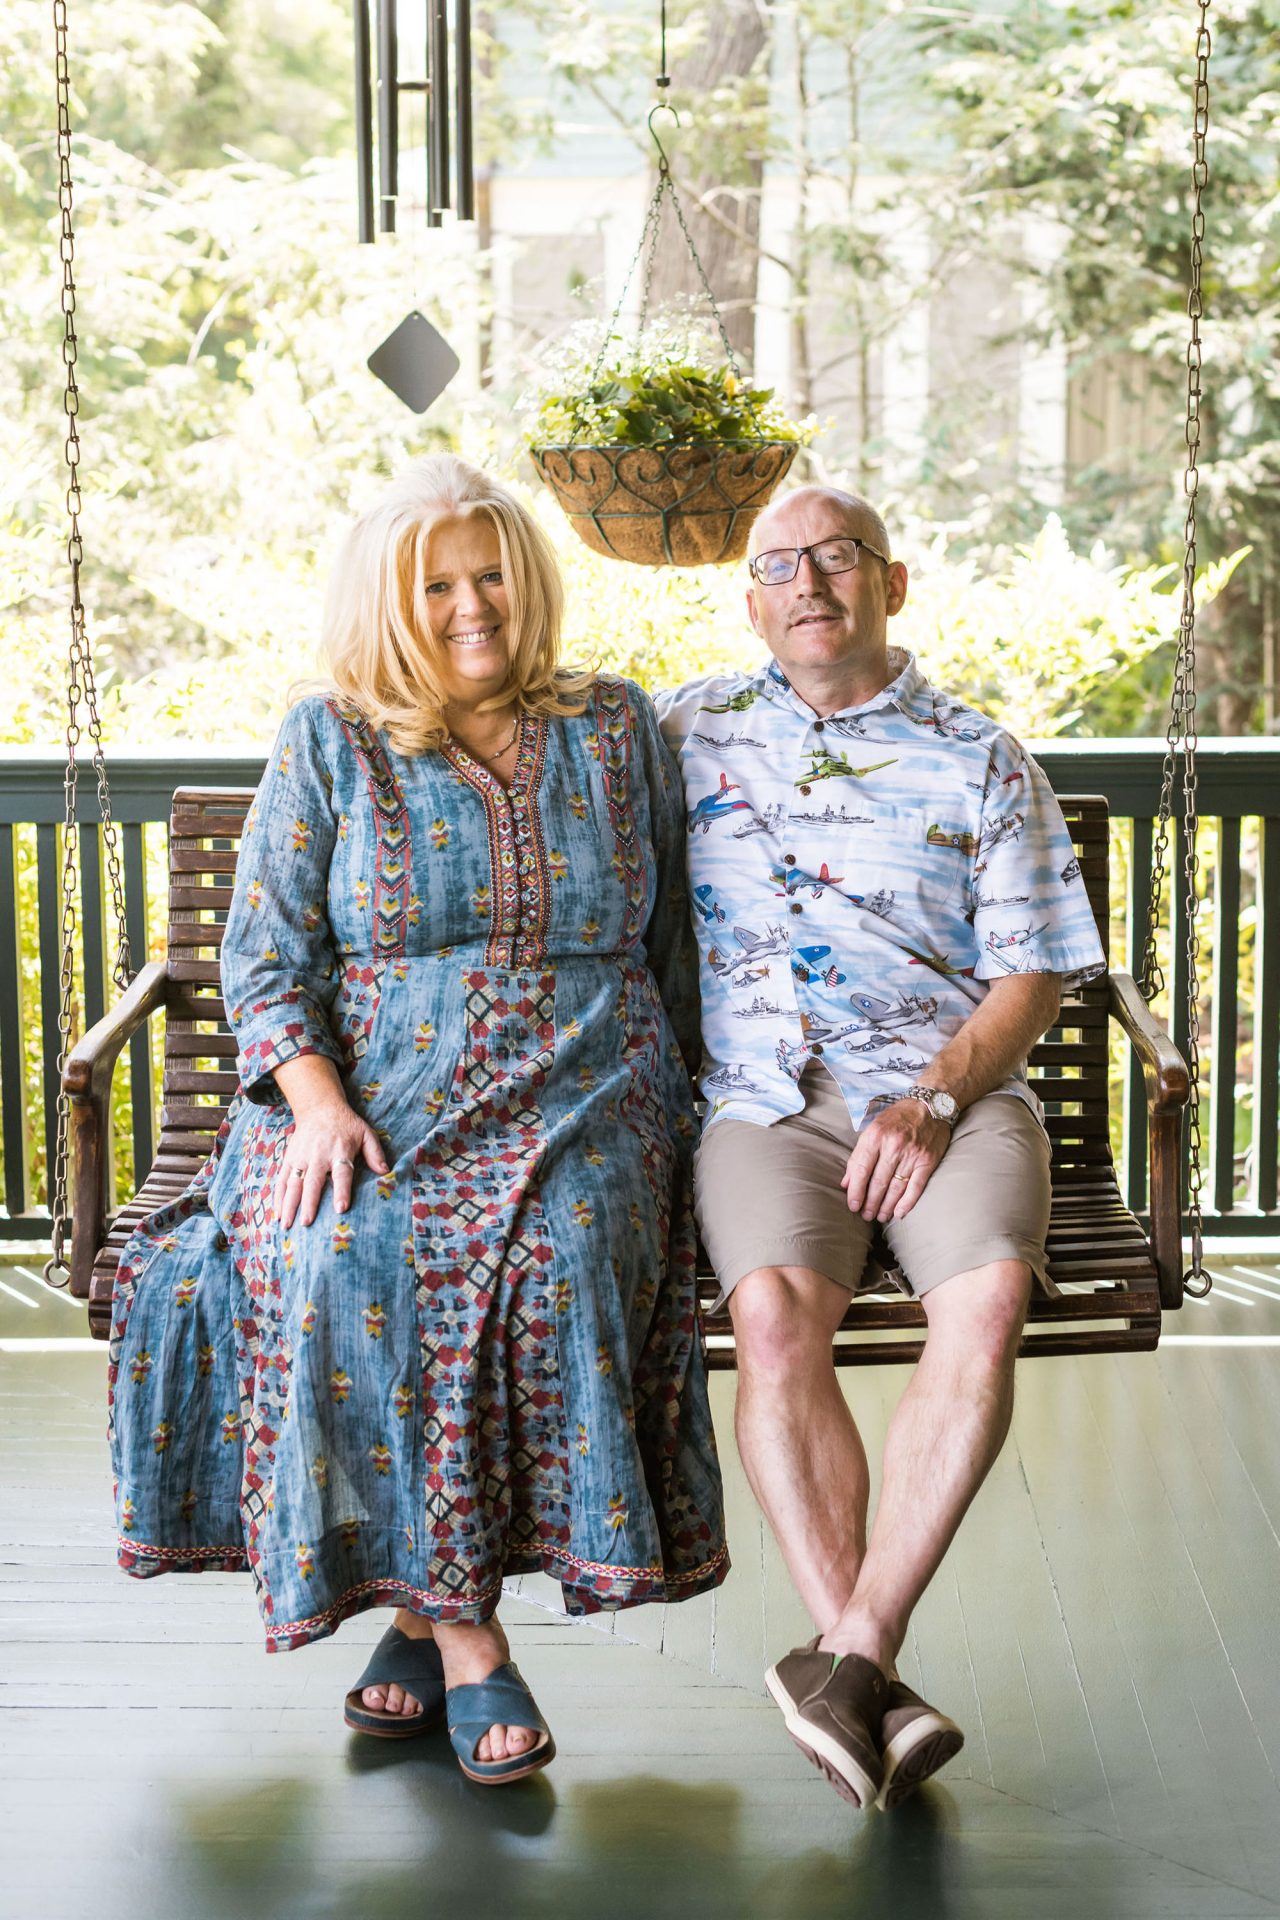 The Innkeepers sitting together on a swing on the porch and smiling. Shawnie weraing a long, floral dress, Willy wearing khaki shorts and a colorful, airplane-patterned shirt.